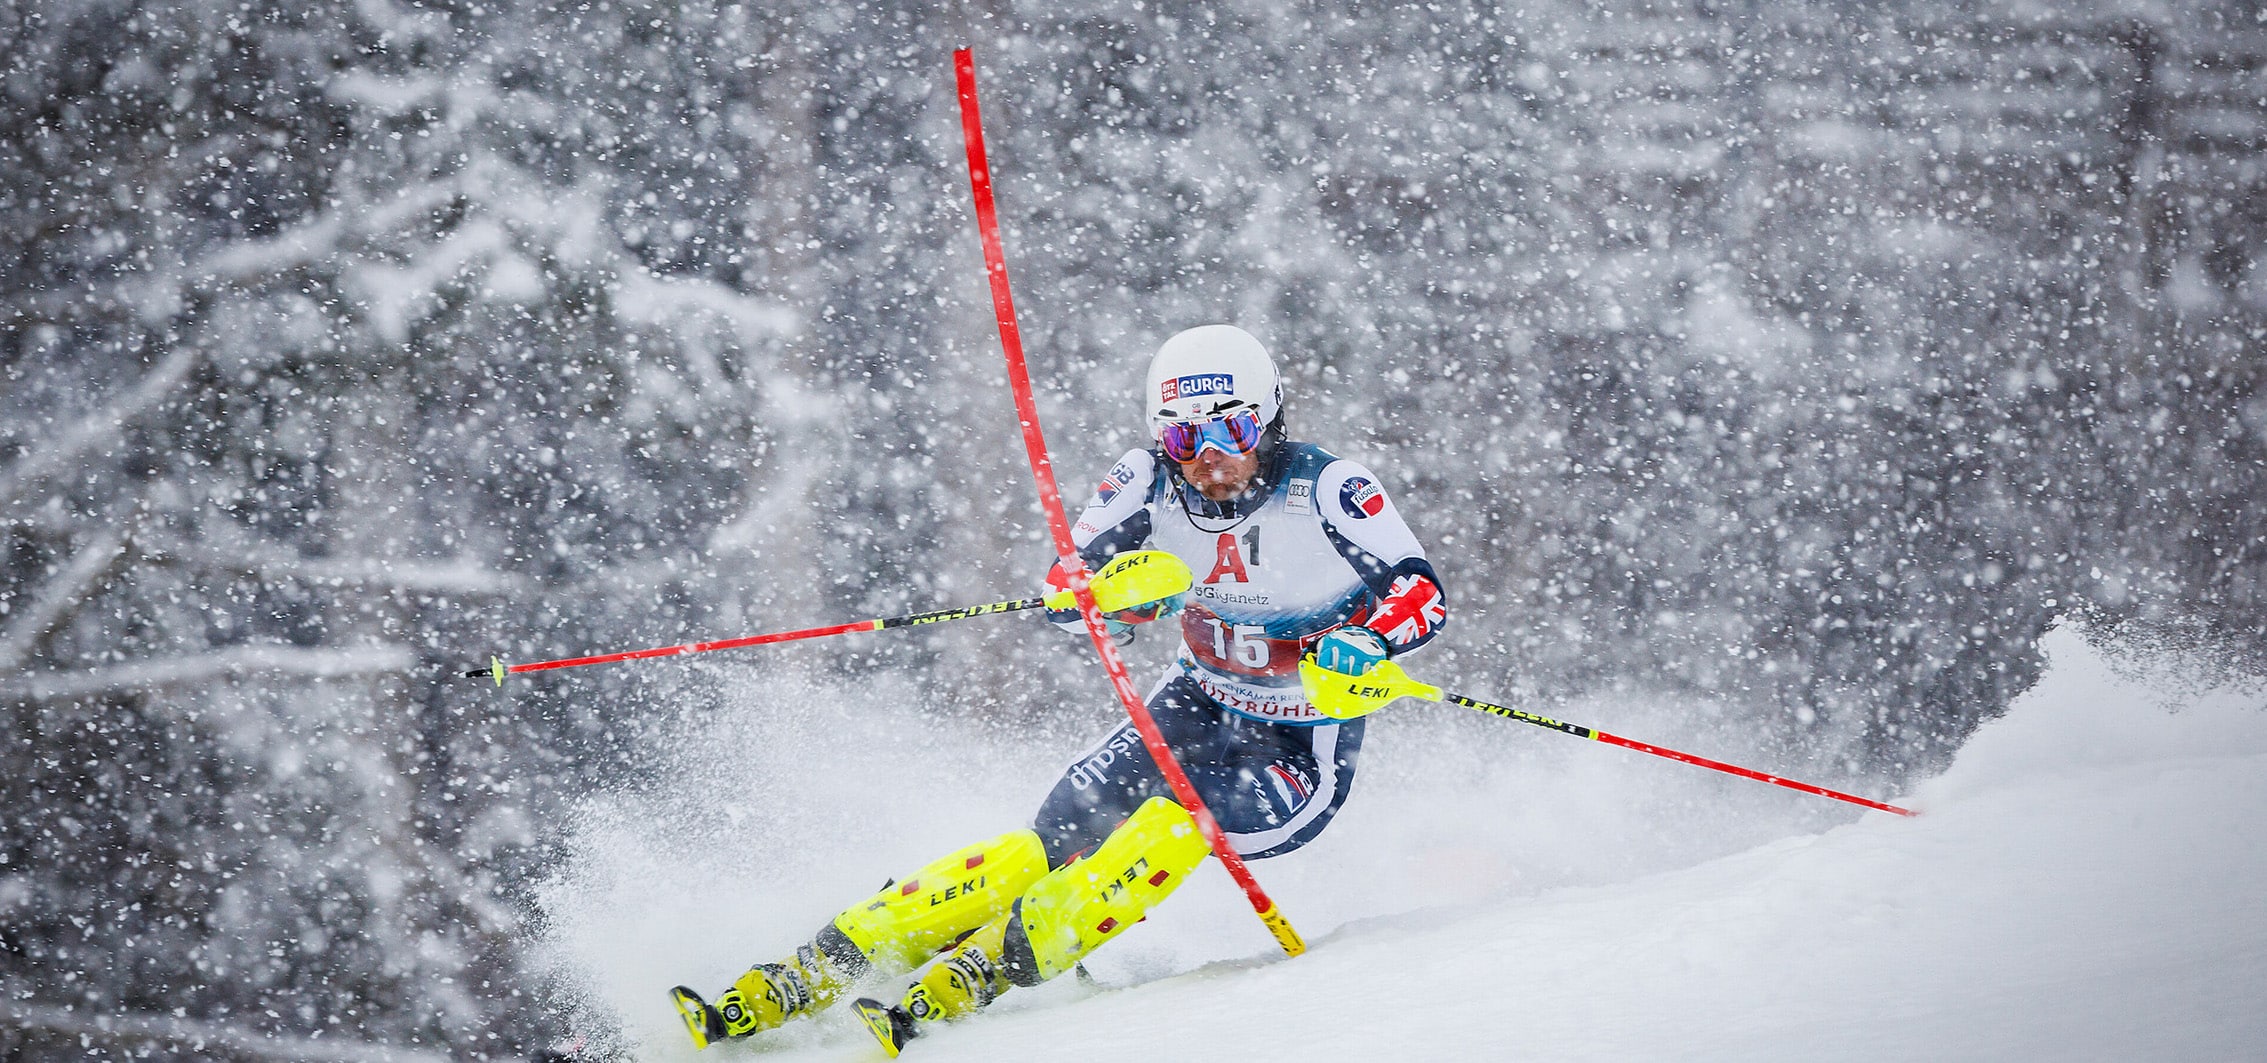 Ten key facts to know ahead of mythical hahnenkamm downhill race 2023